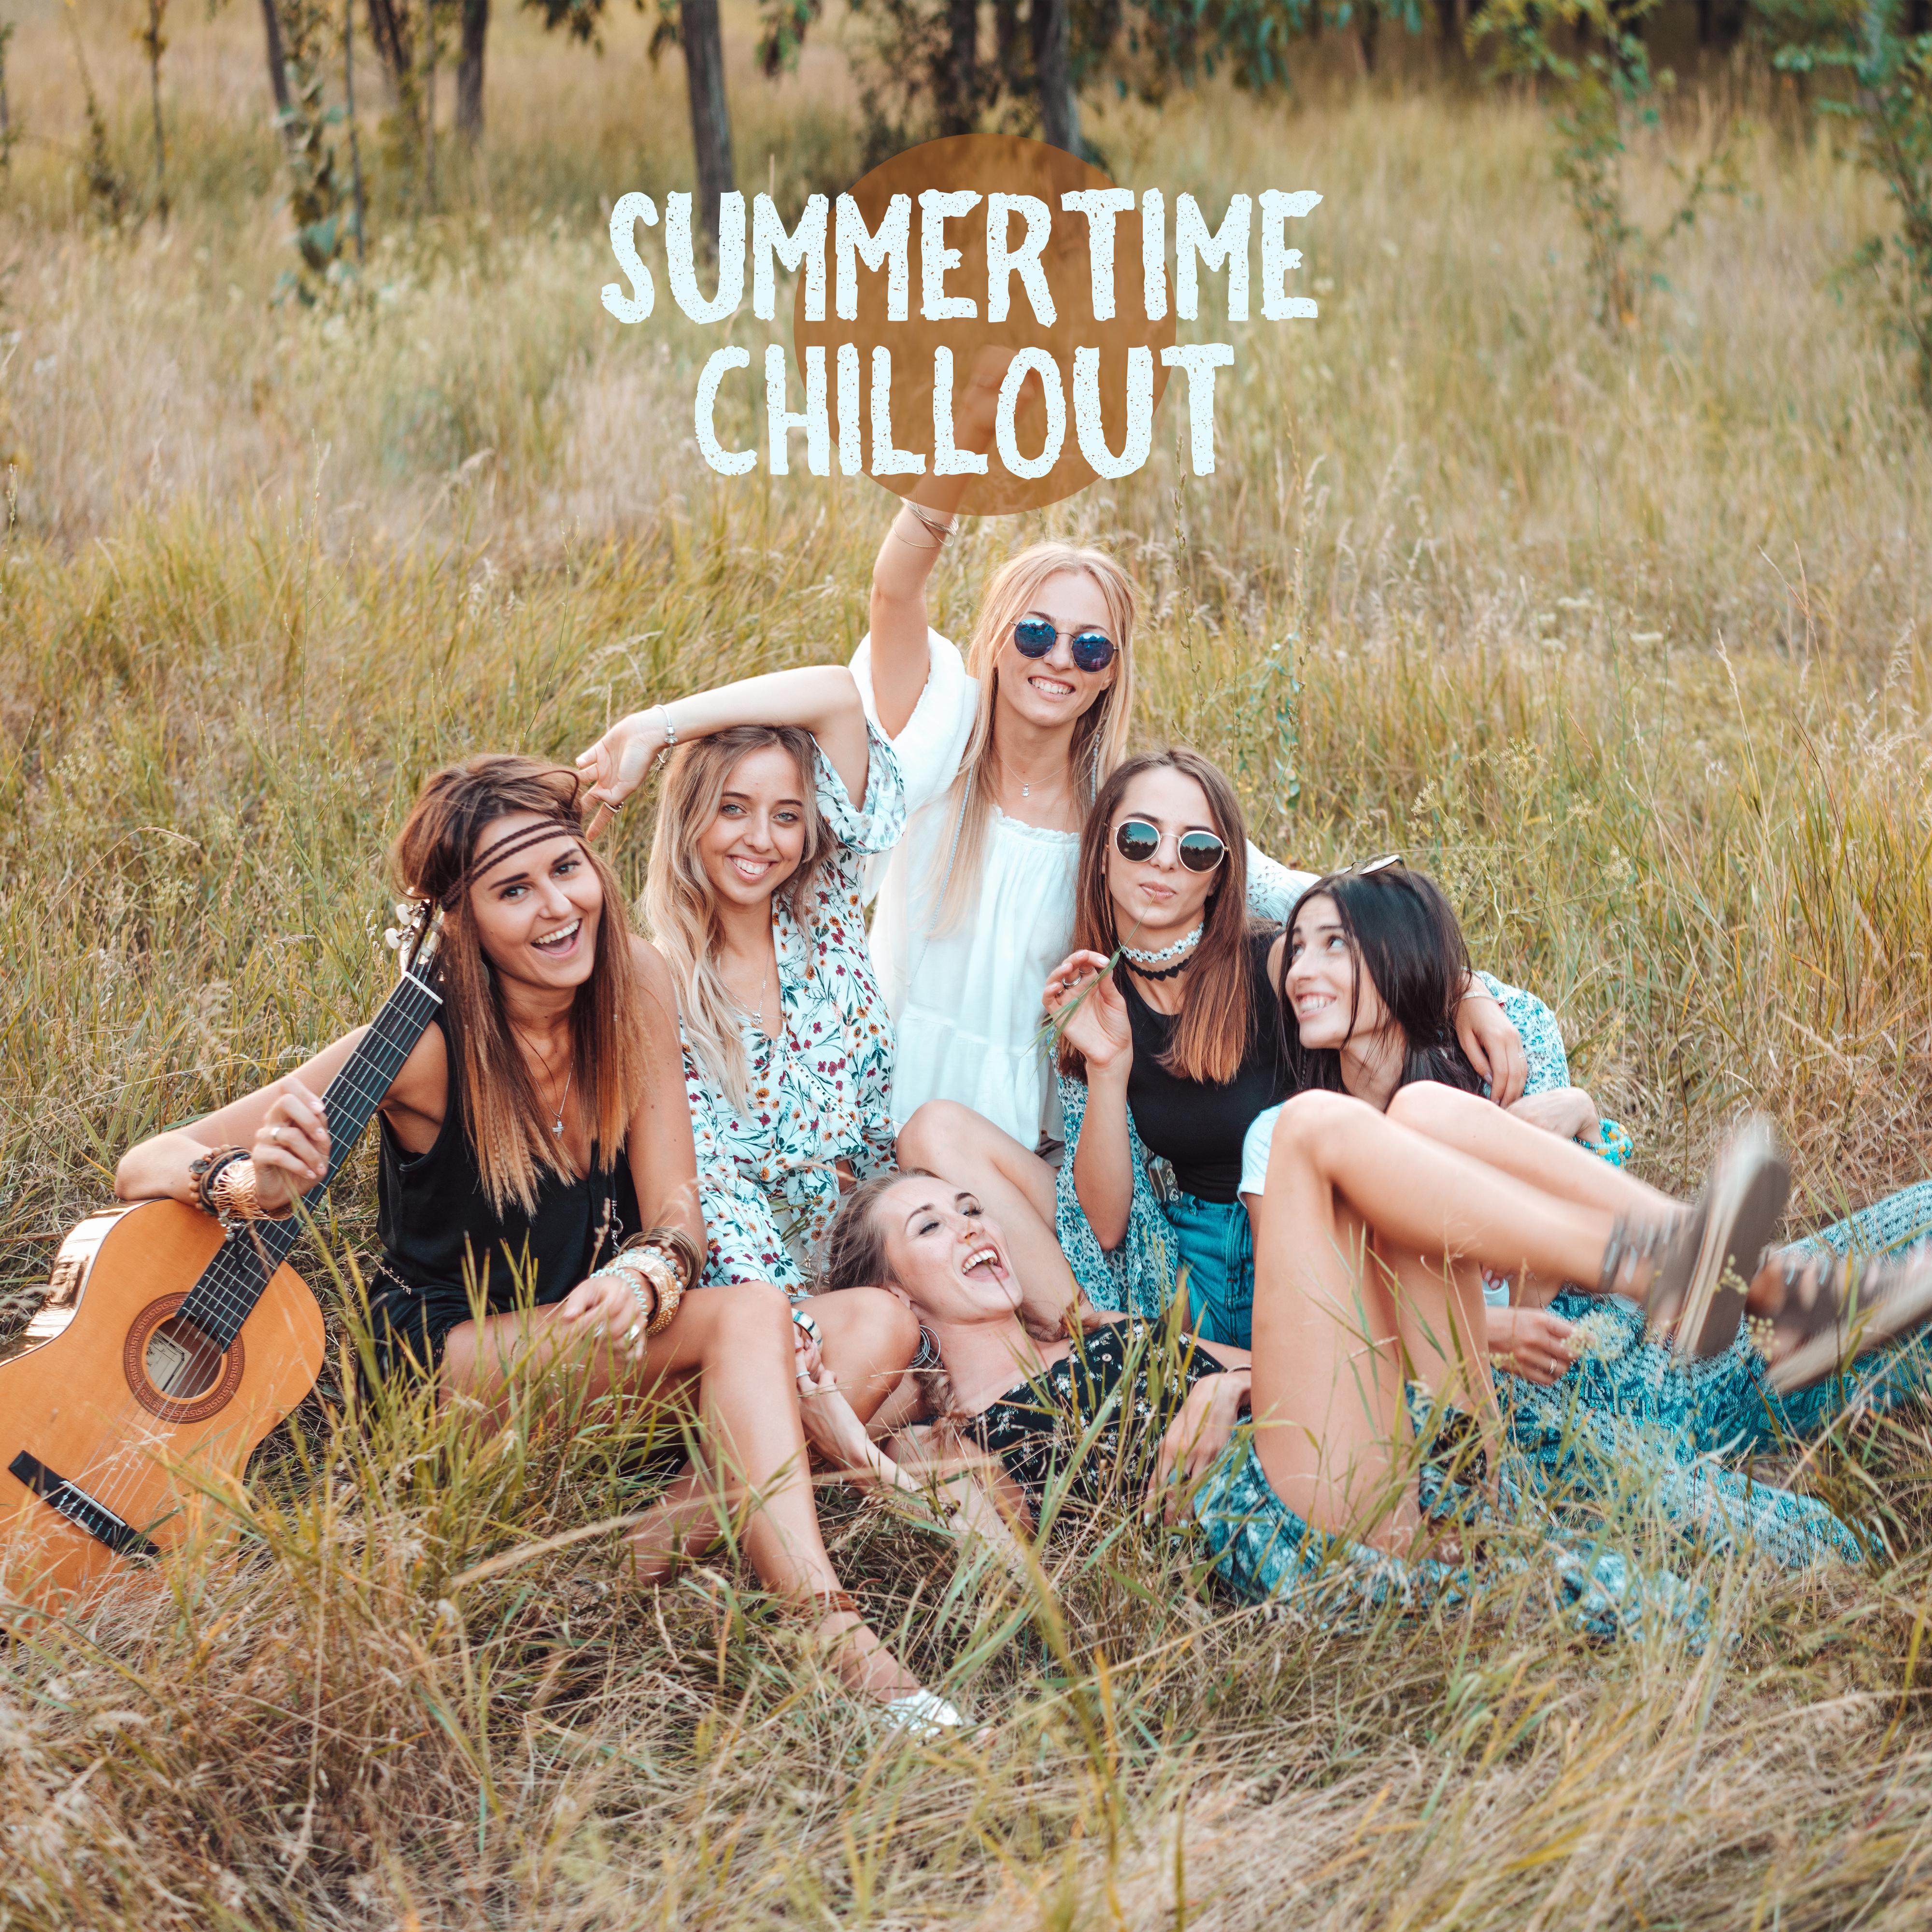 Summertime Chillout: Warm Chillout Sounds for Holidays, Rest and Relaxation